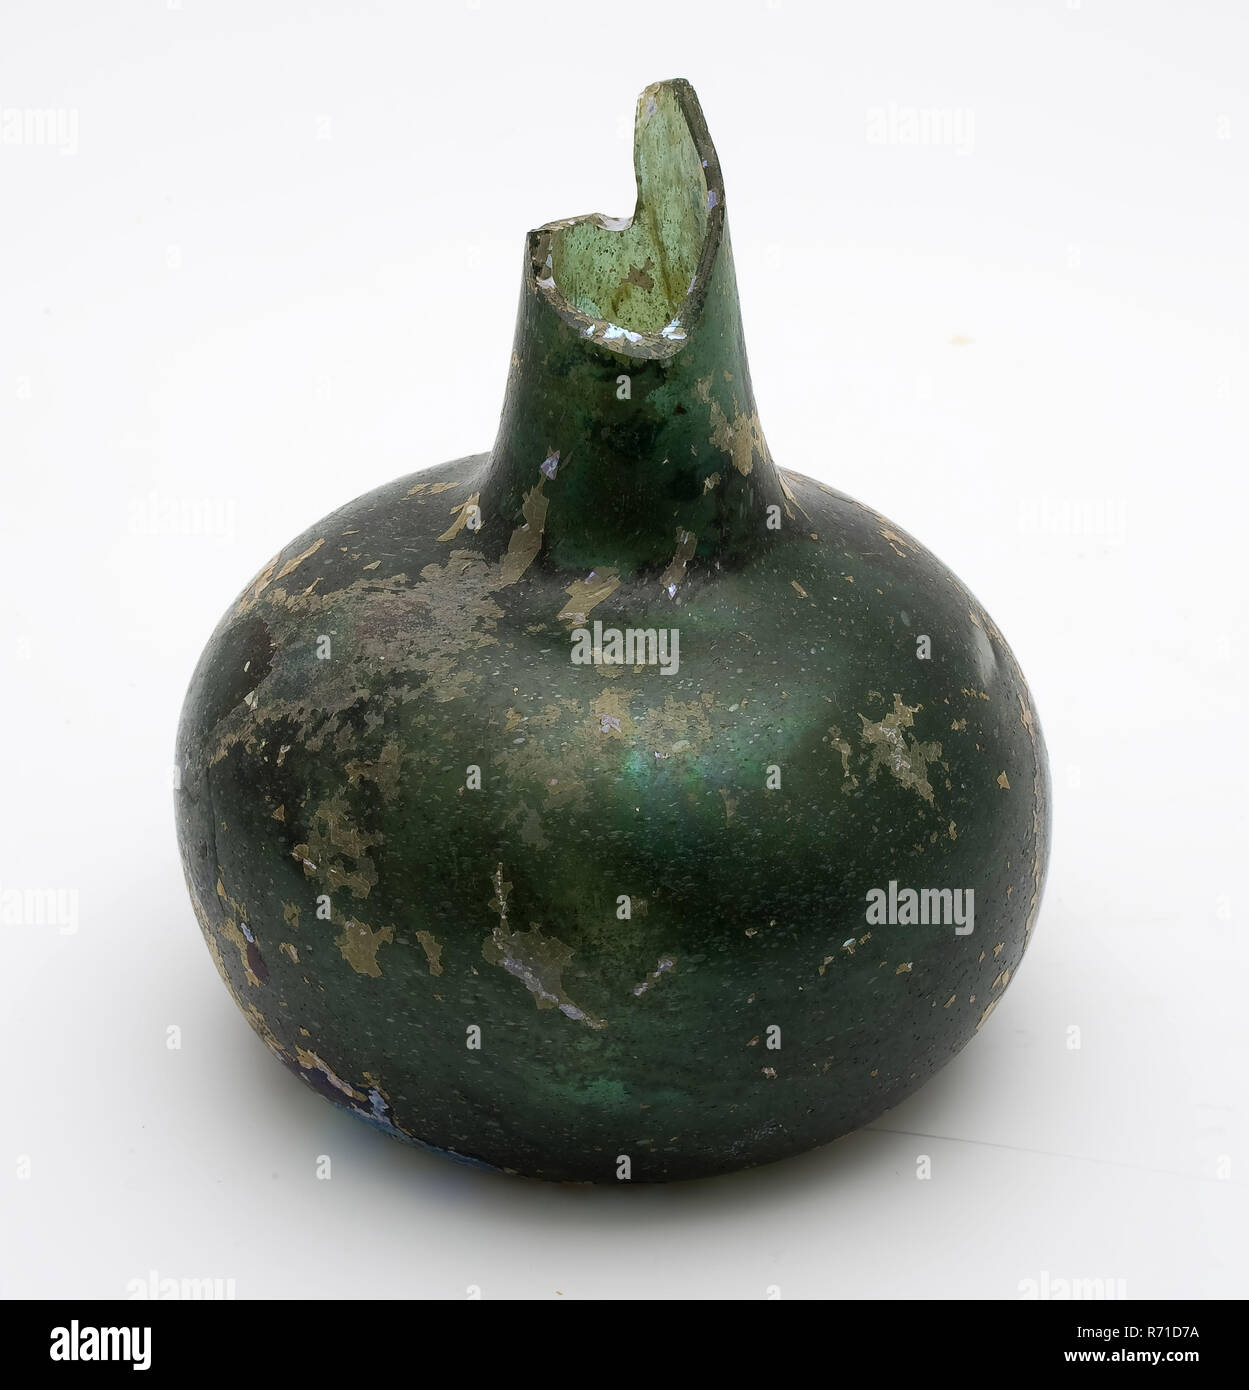 Bulbous bottle, onion, belly bottle bottle holder bottomfound glass, free blown and shaped Small bulbous bottle onion in clear dark green glass. Pontil mark under slightly raised soil Body with convex wall to flat shoulders and narrowed neck broken off at approximately 4.7 cm archeology Rotterdam Kralingen-Crooswijk Struisenburg's Gravenweg Oostmaaslaan packing Soil discovery Oostmaaslaan and De's Gravenweg Stock Photo